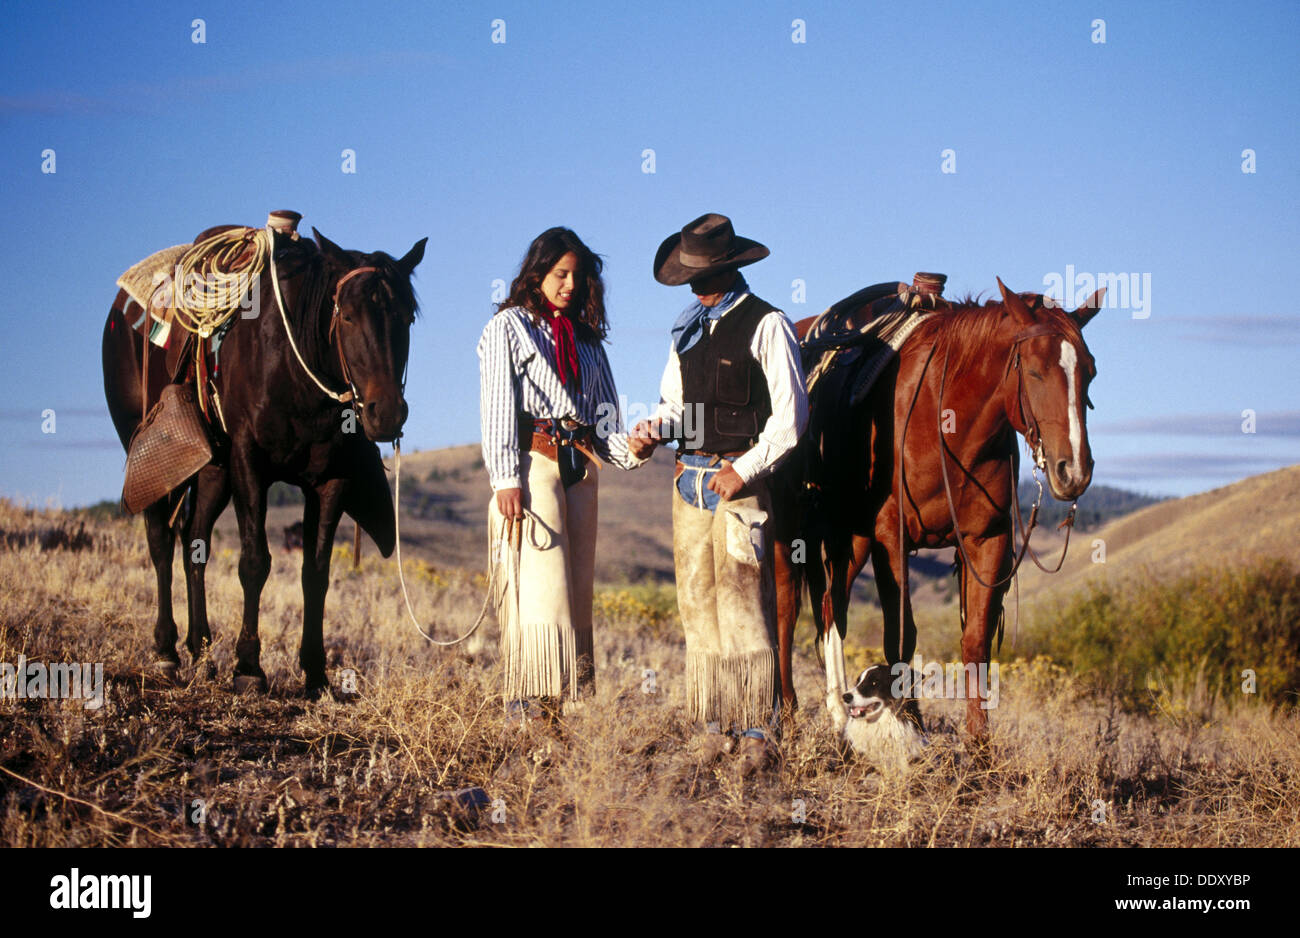 Image result for COWGIRLS WORKING IN RANCHES